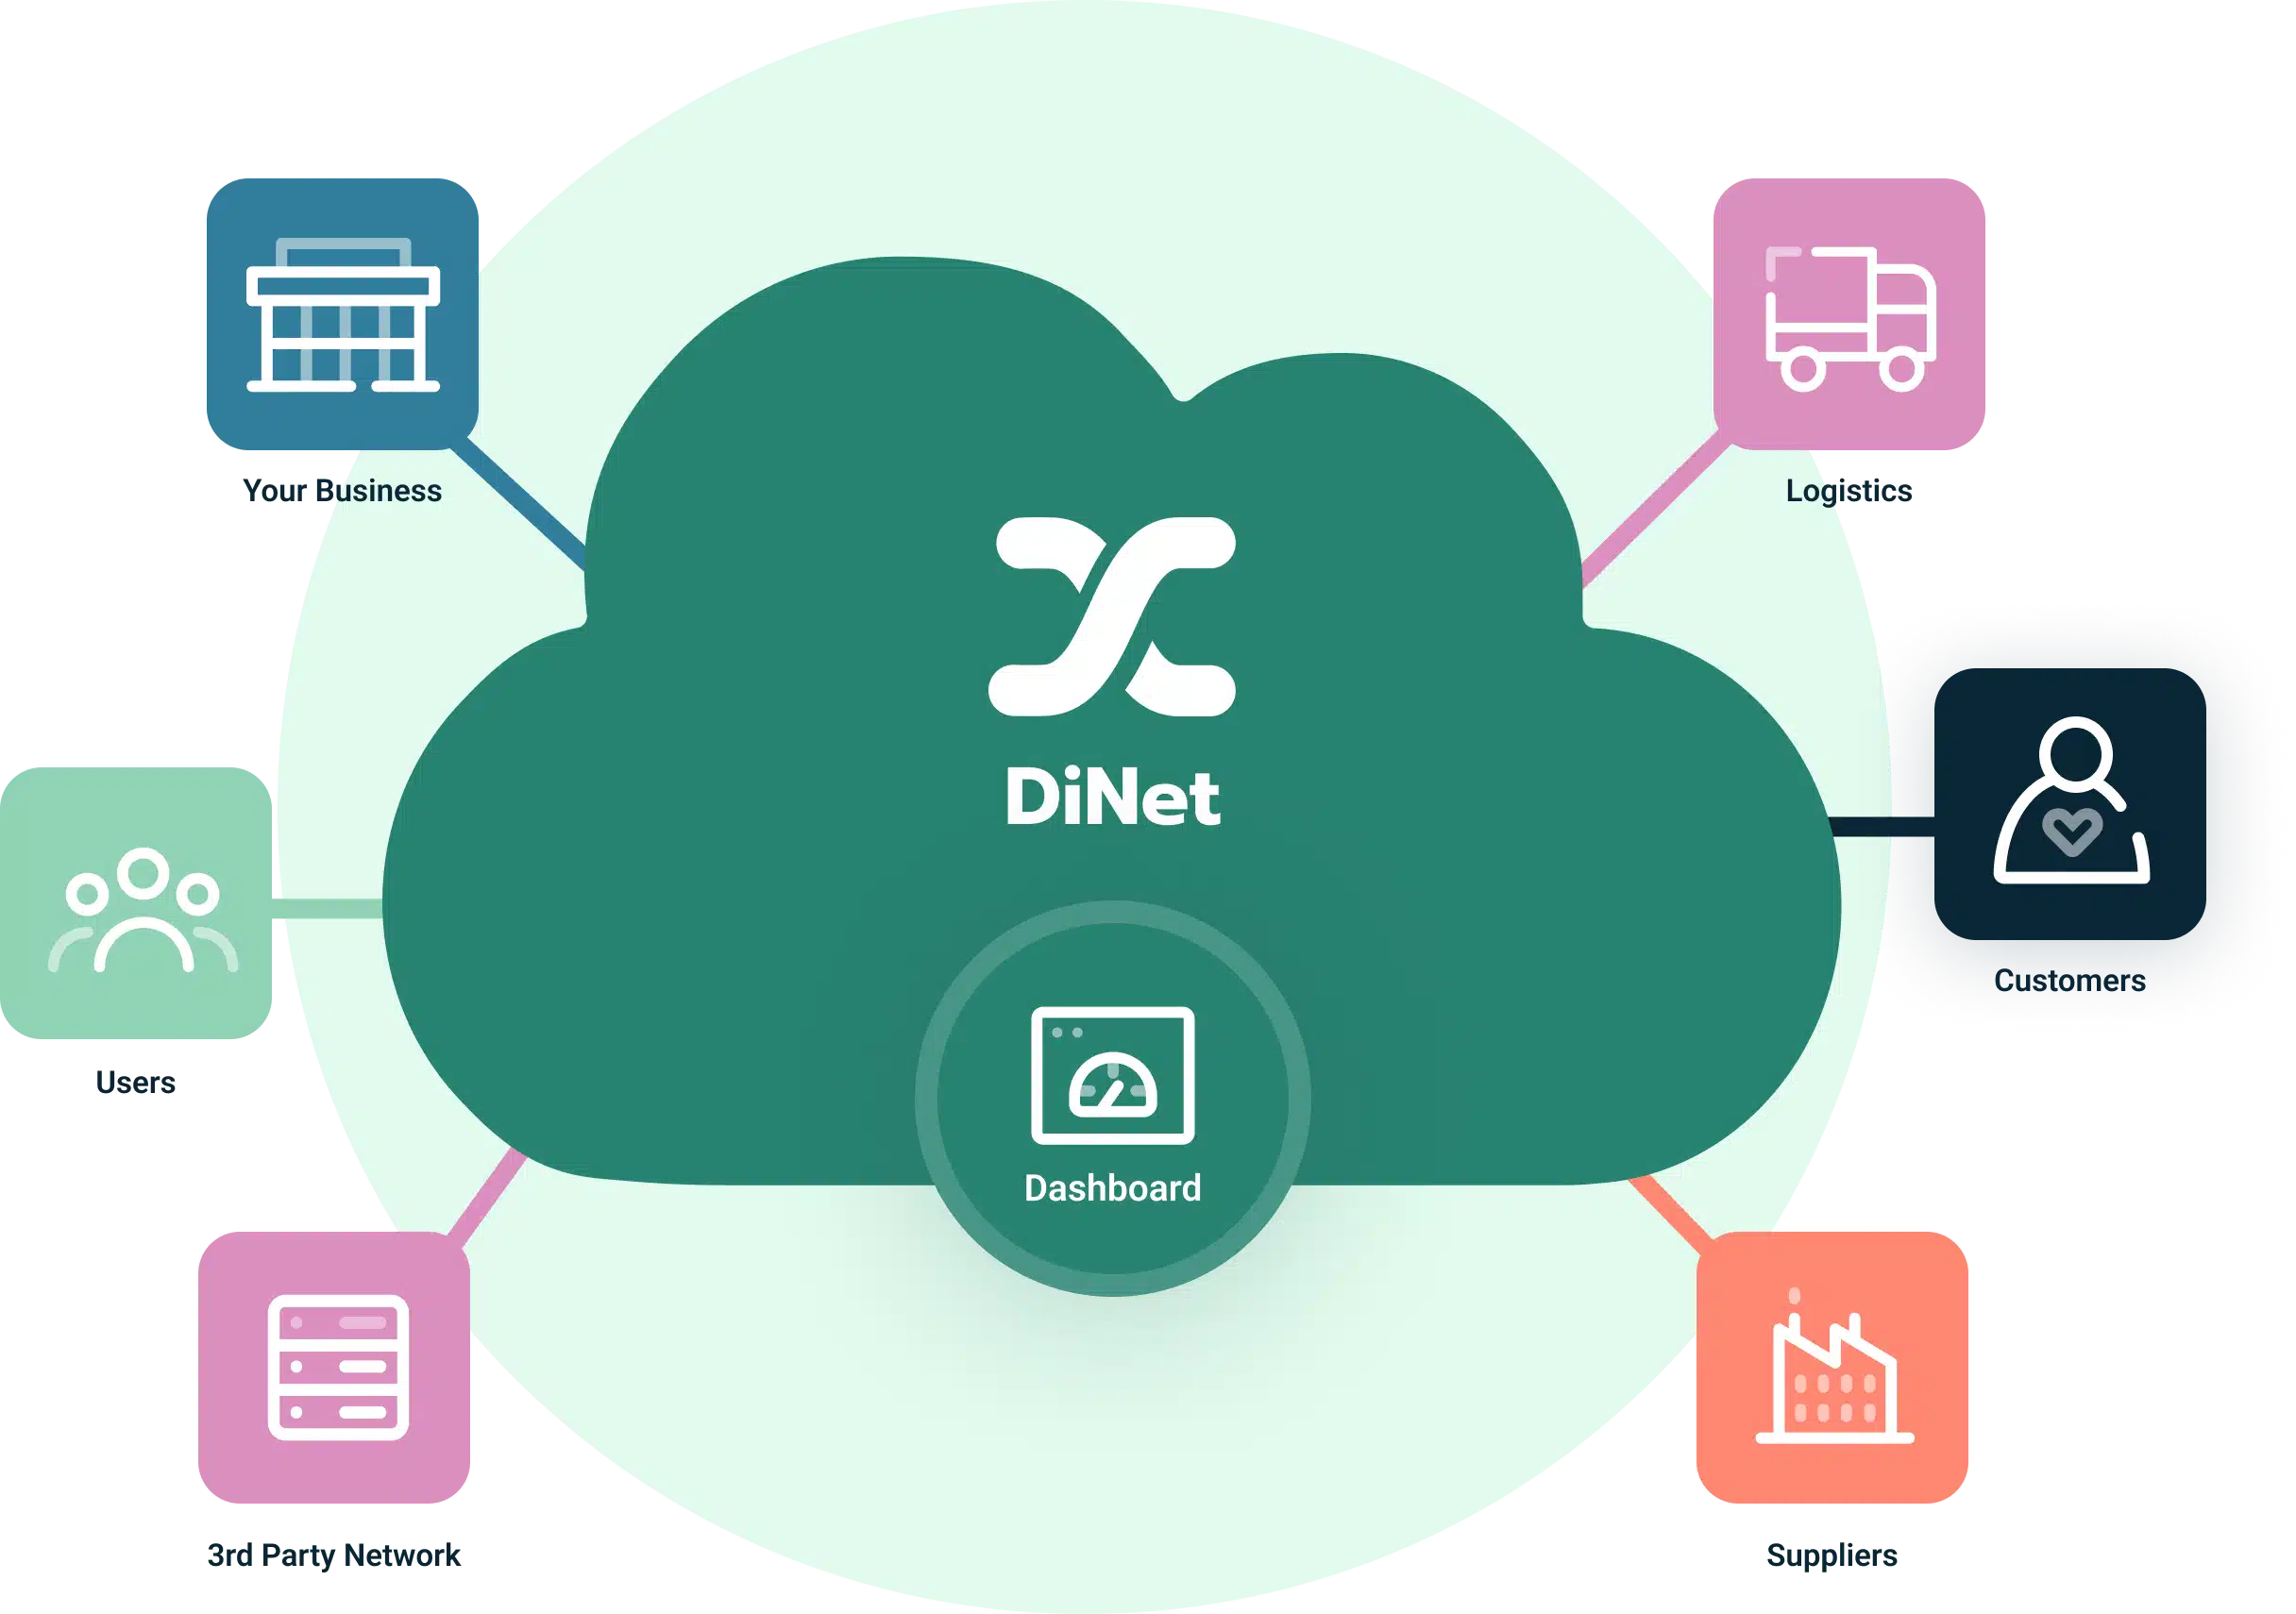 How DiNet works